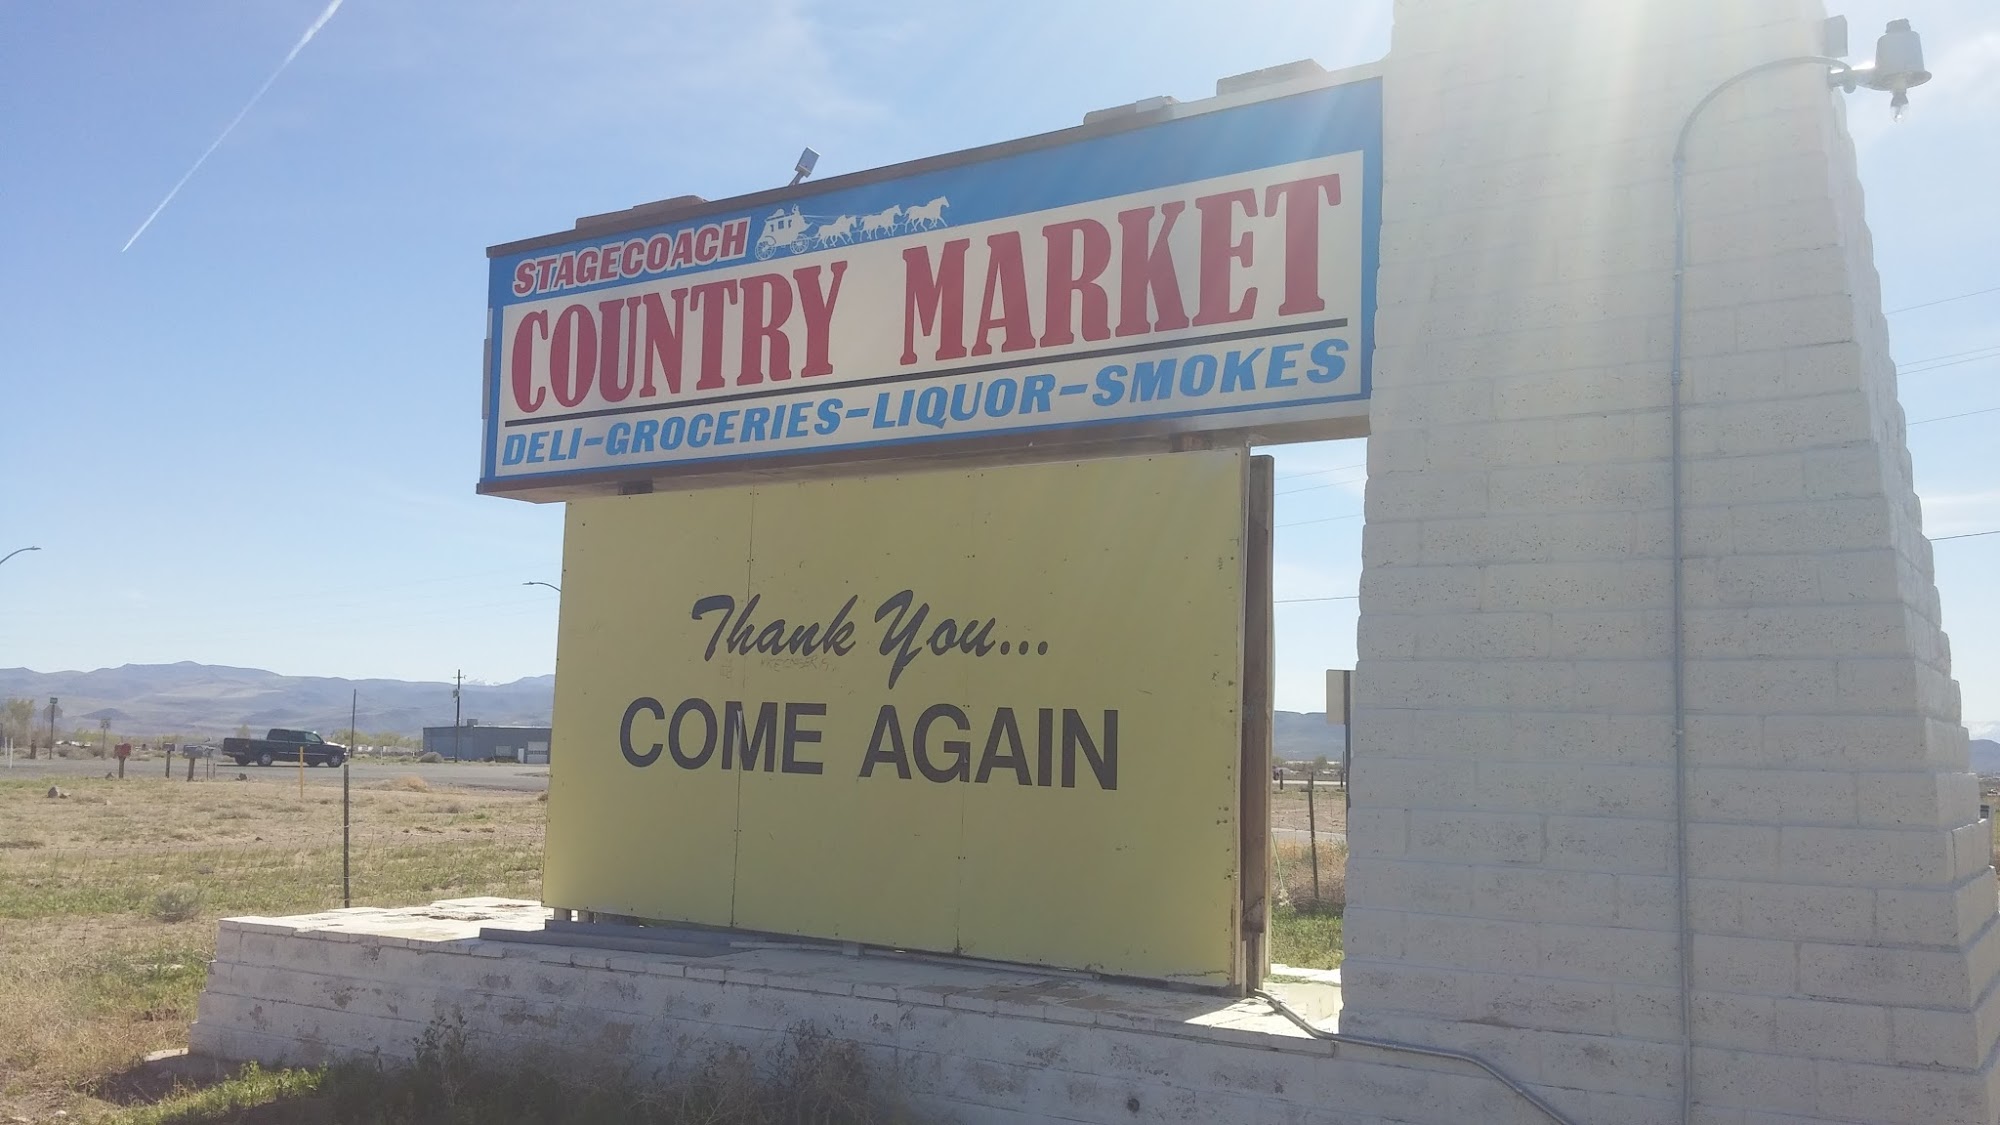 Stagecoach Country Market